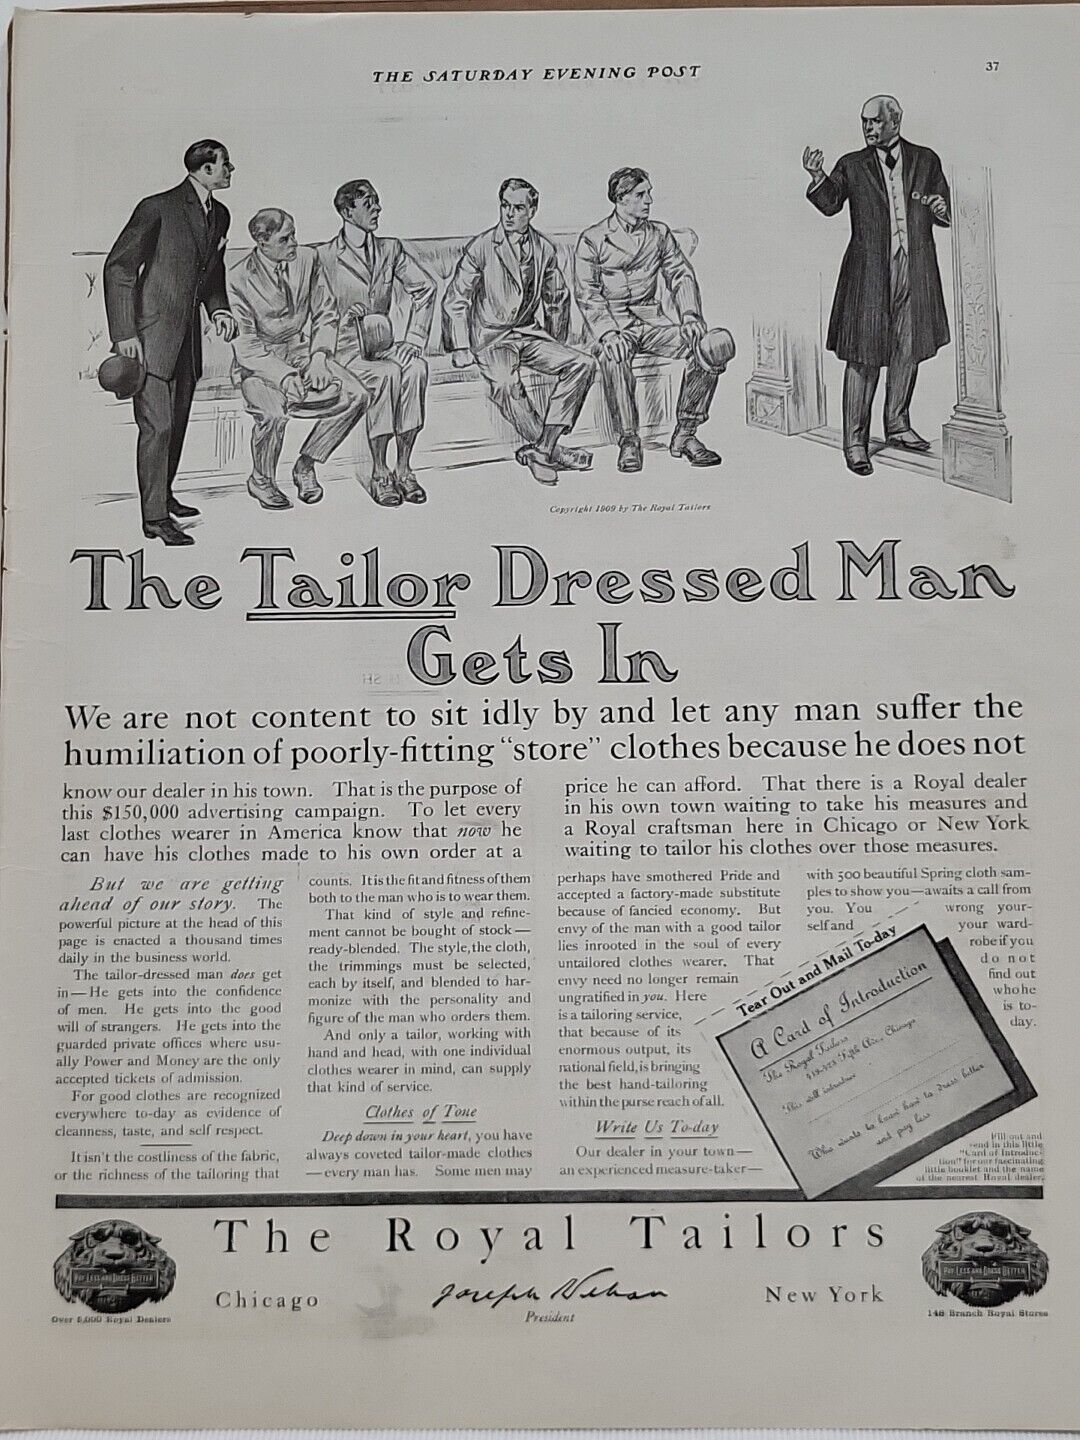 1908 The Royal Tailors S.E. Post Print Advertising tailor-Made Suits Emblem